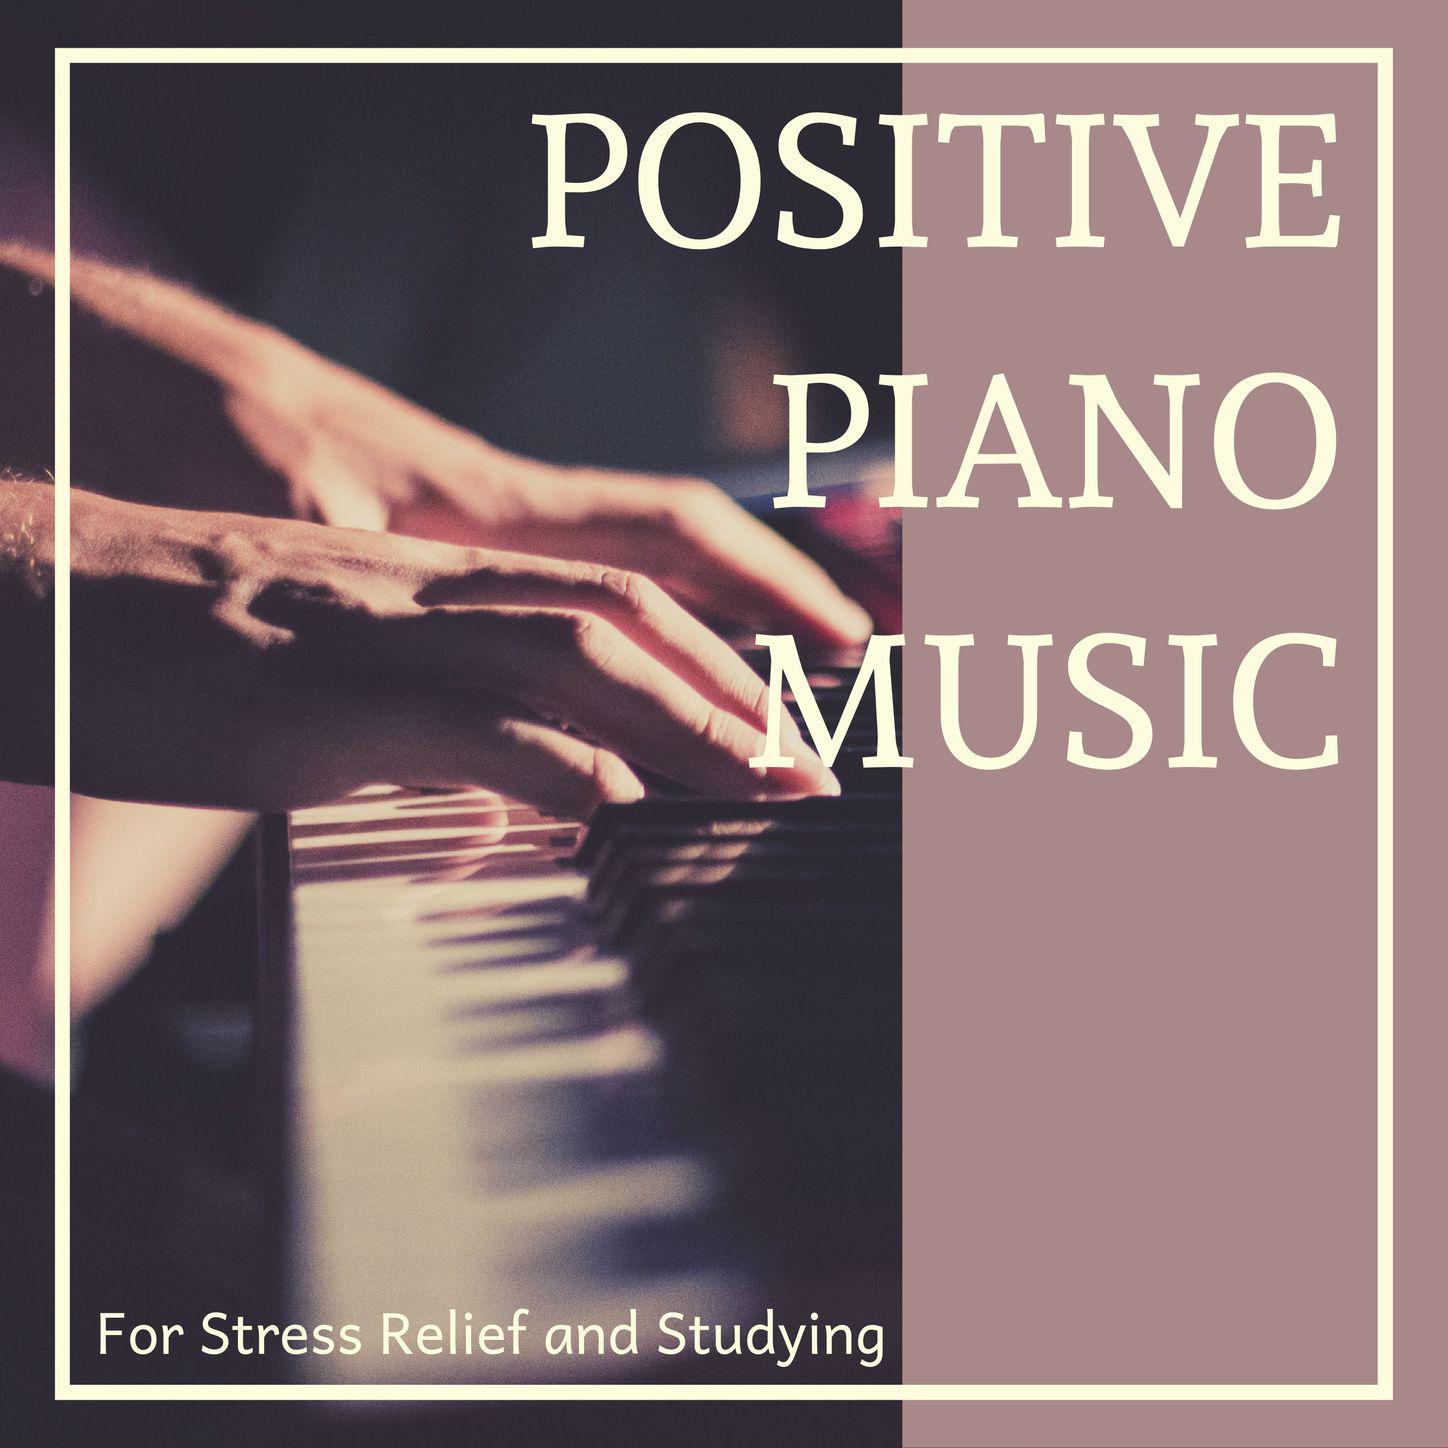 Positive Piano Music for Stress Relief and Studying